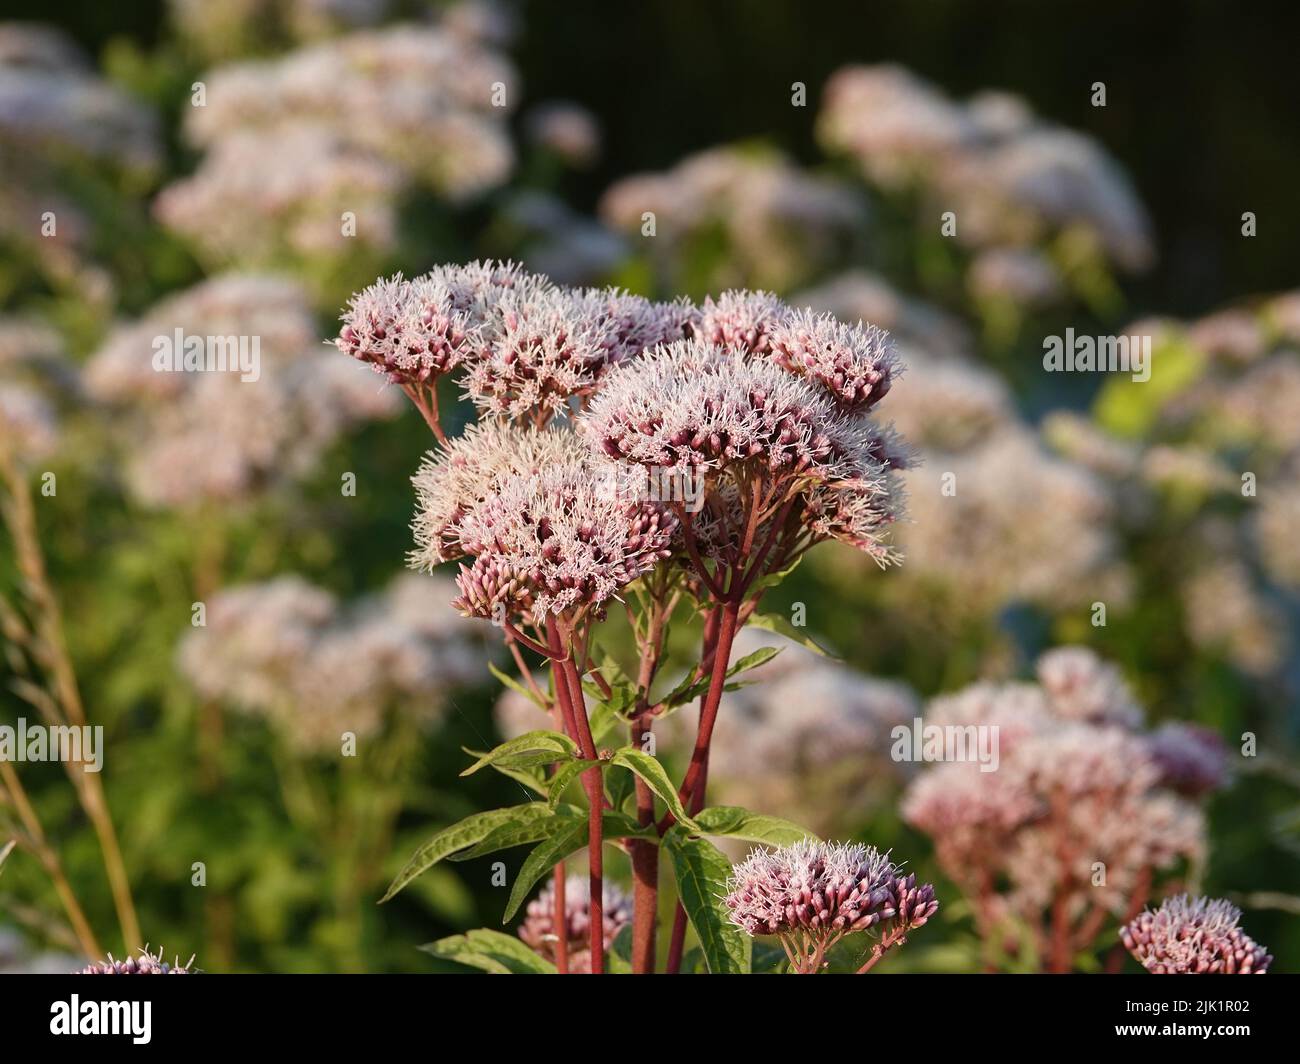 Eupatorium cannabinum, commonly known as hemp-agrimony or holy rope. It is used in the European traditional medicine against colds and as a laxative. Stock Photo